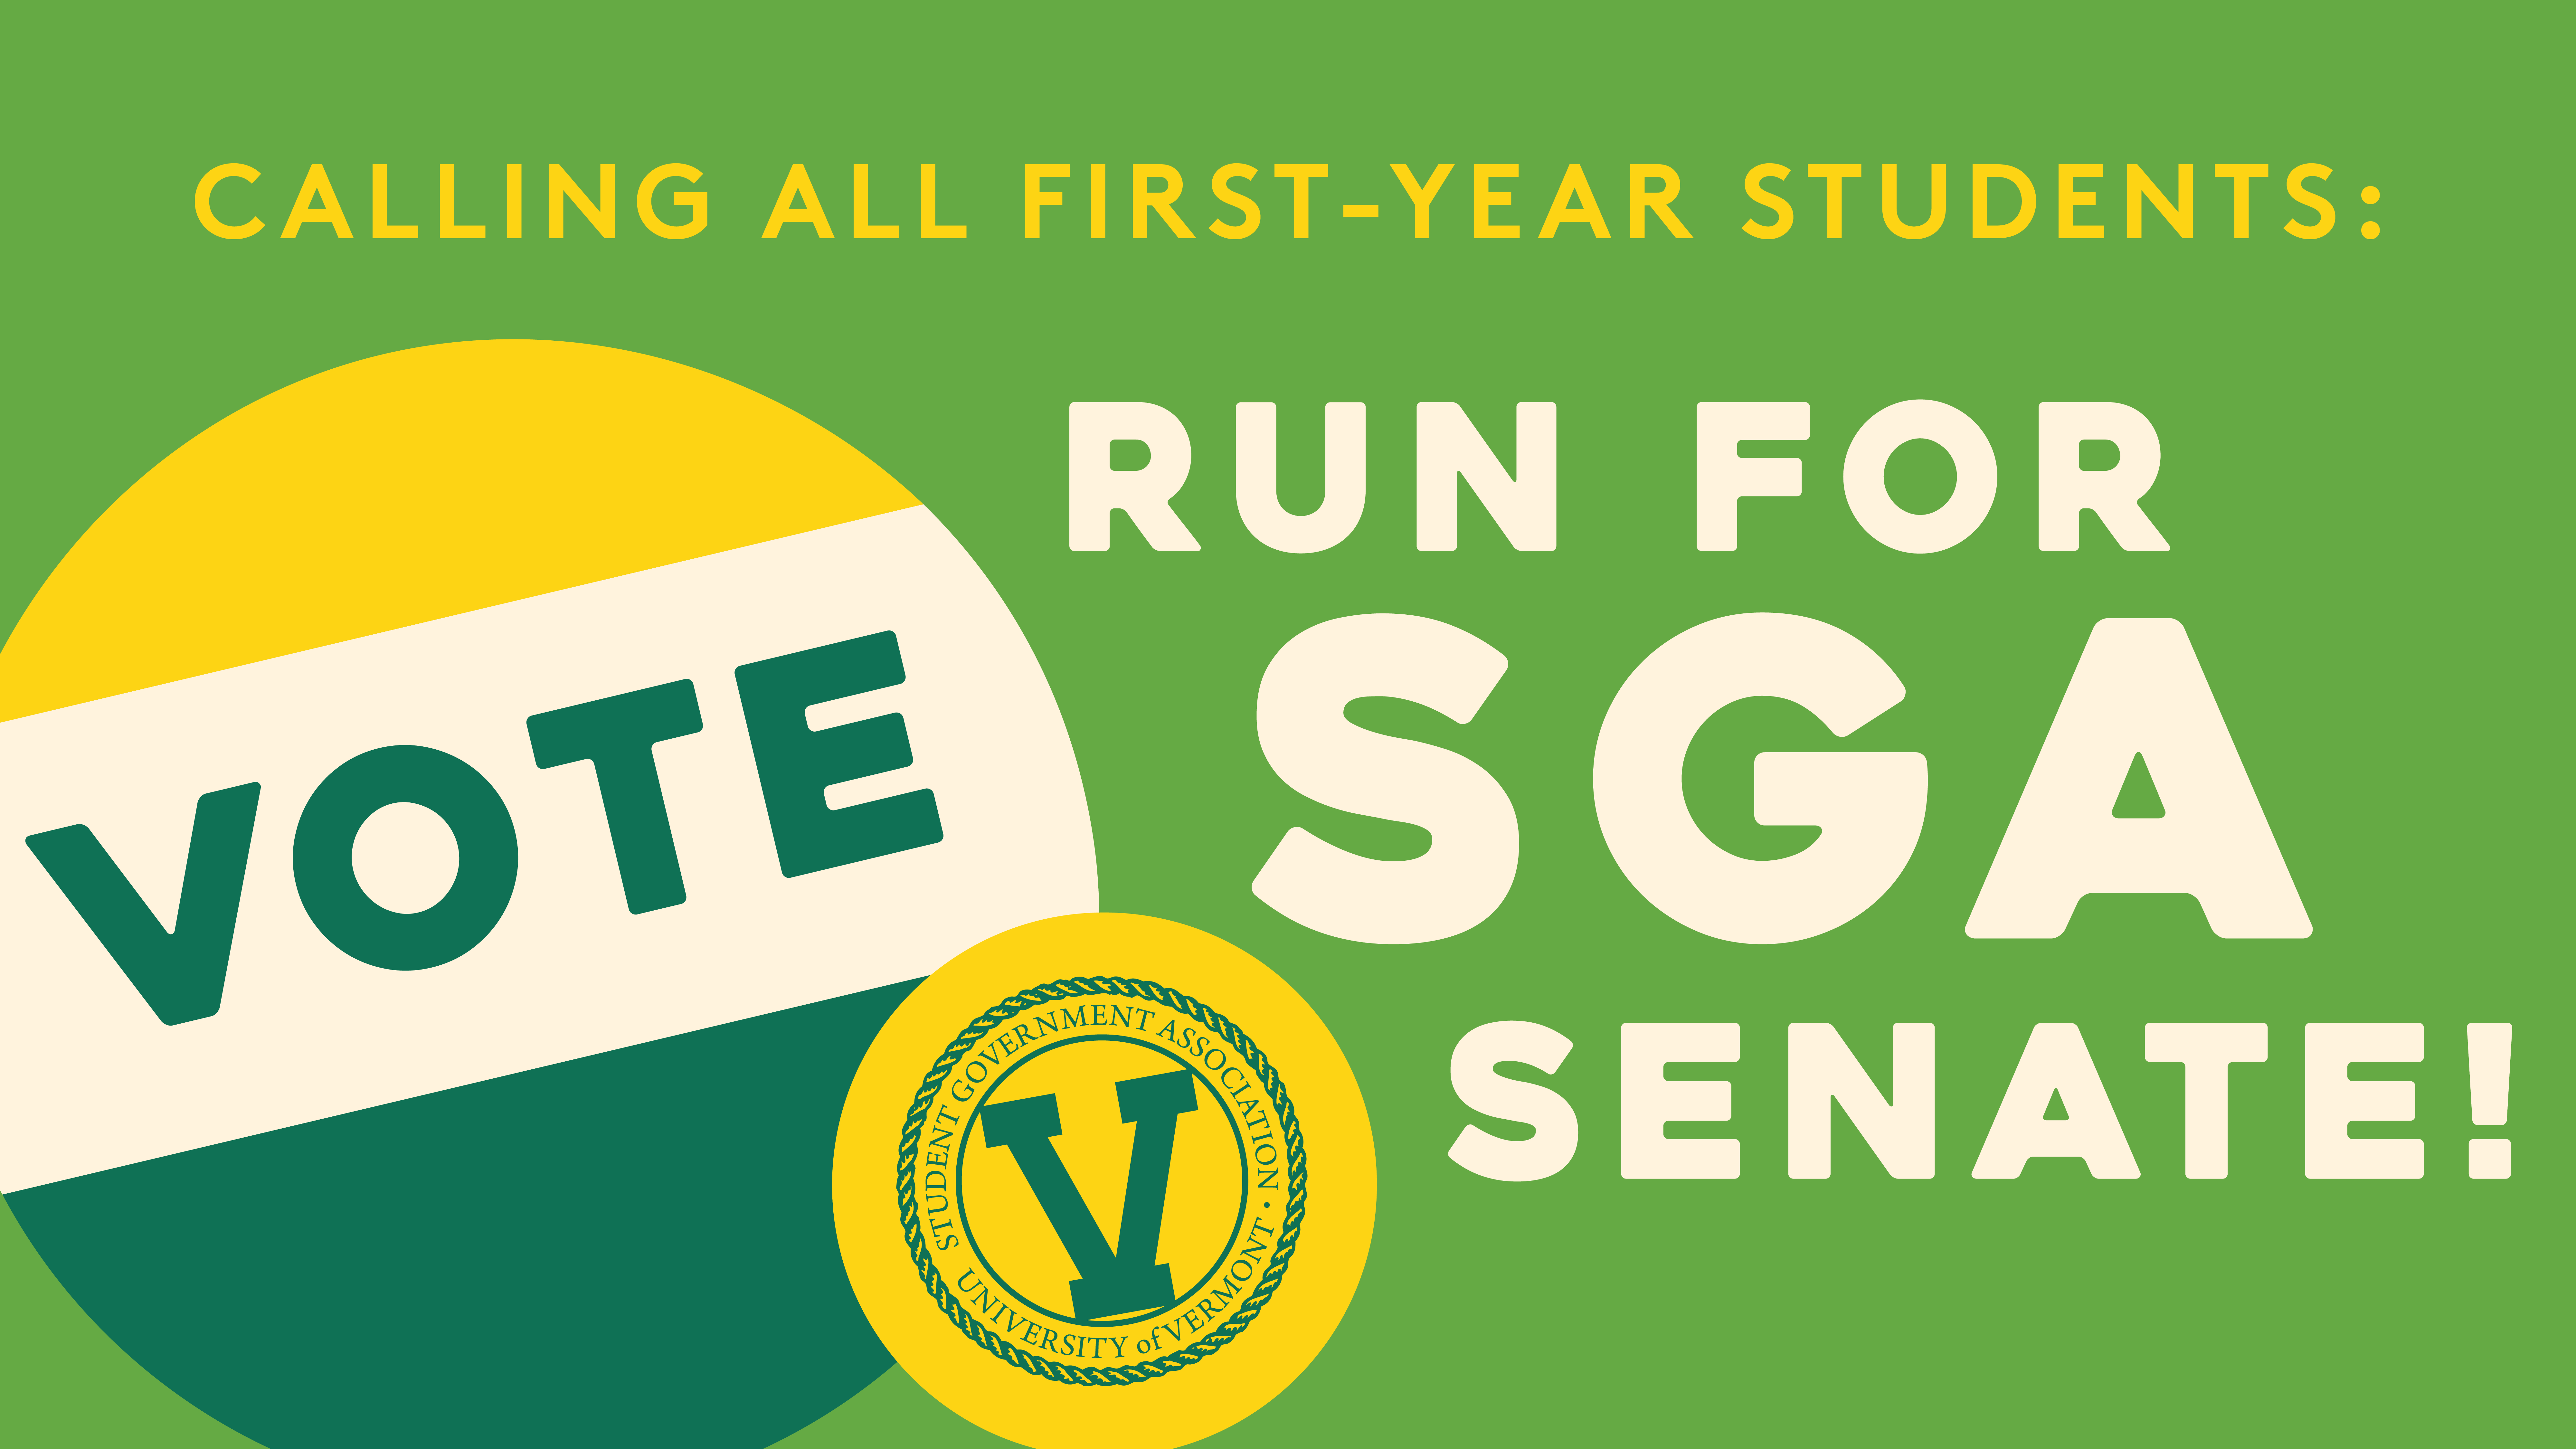 A "VOTE" button and text that reads: Calling all first-year students: Run for SGA Senate!